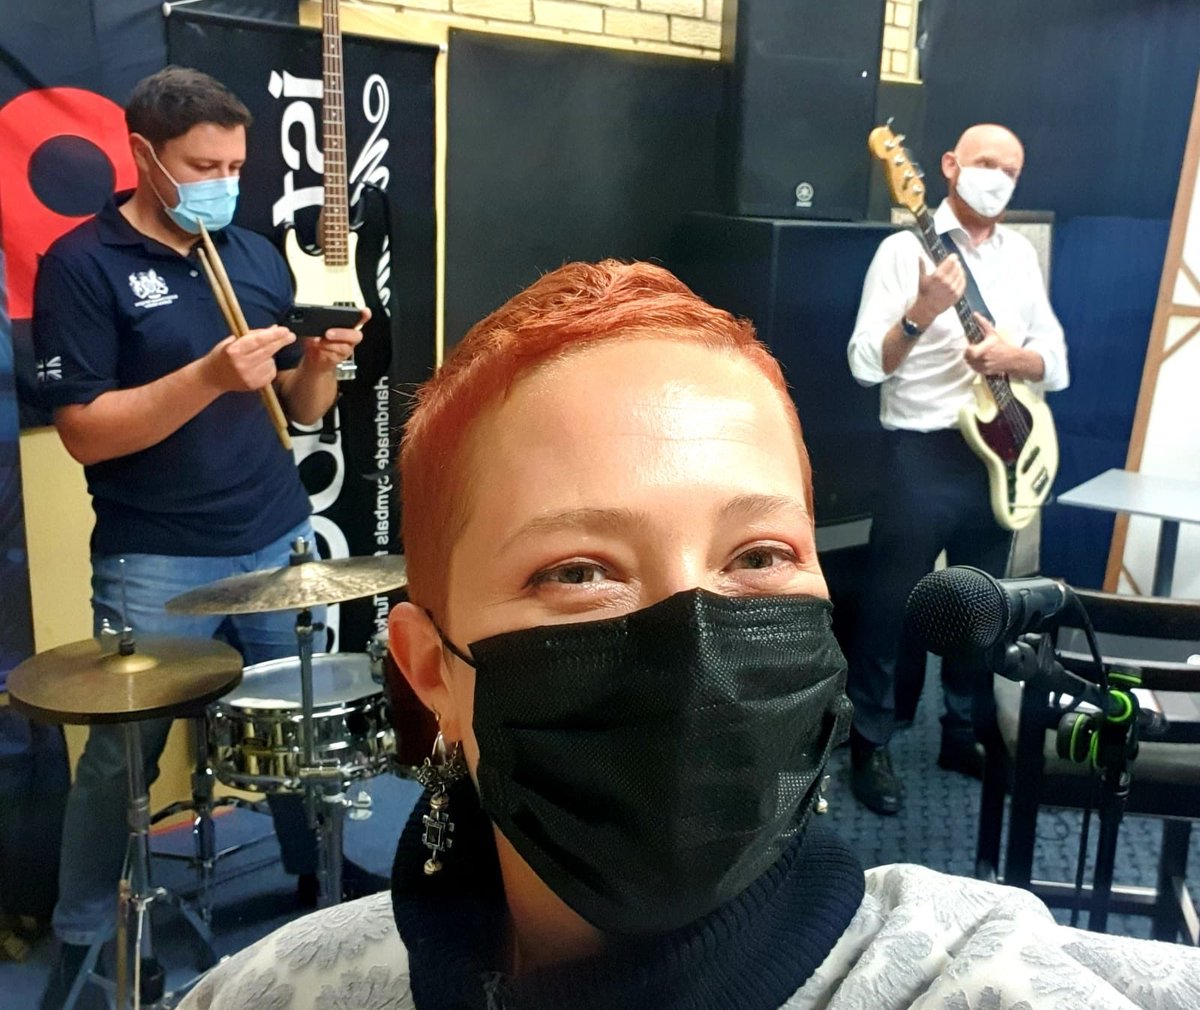 Felt good to get the band back together 🎶- socially distanced and masked, recording a song for our friends @ukinlebanon #DiplomaticInstrument #WearAMask